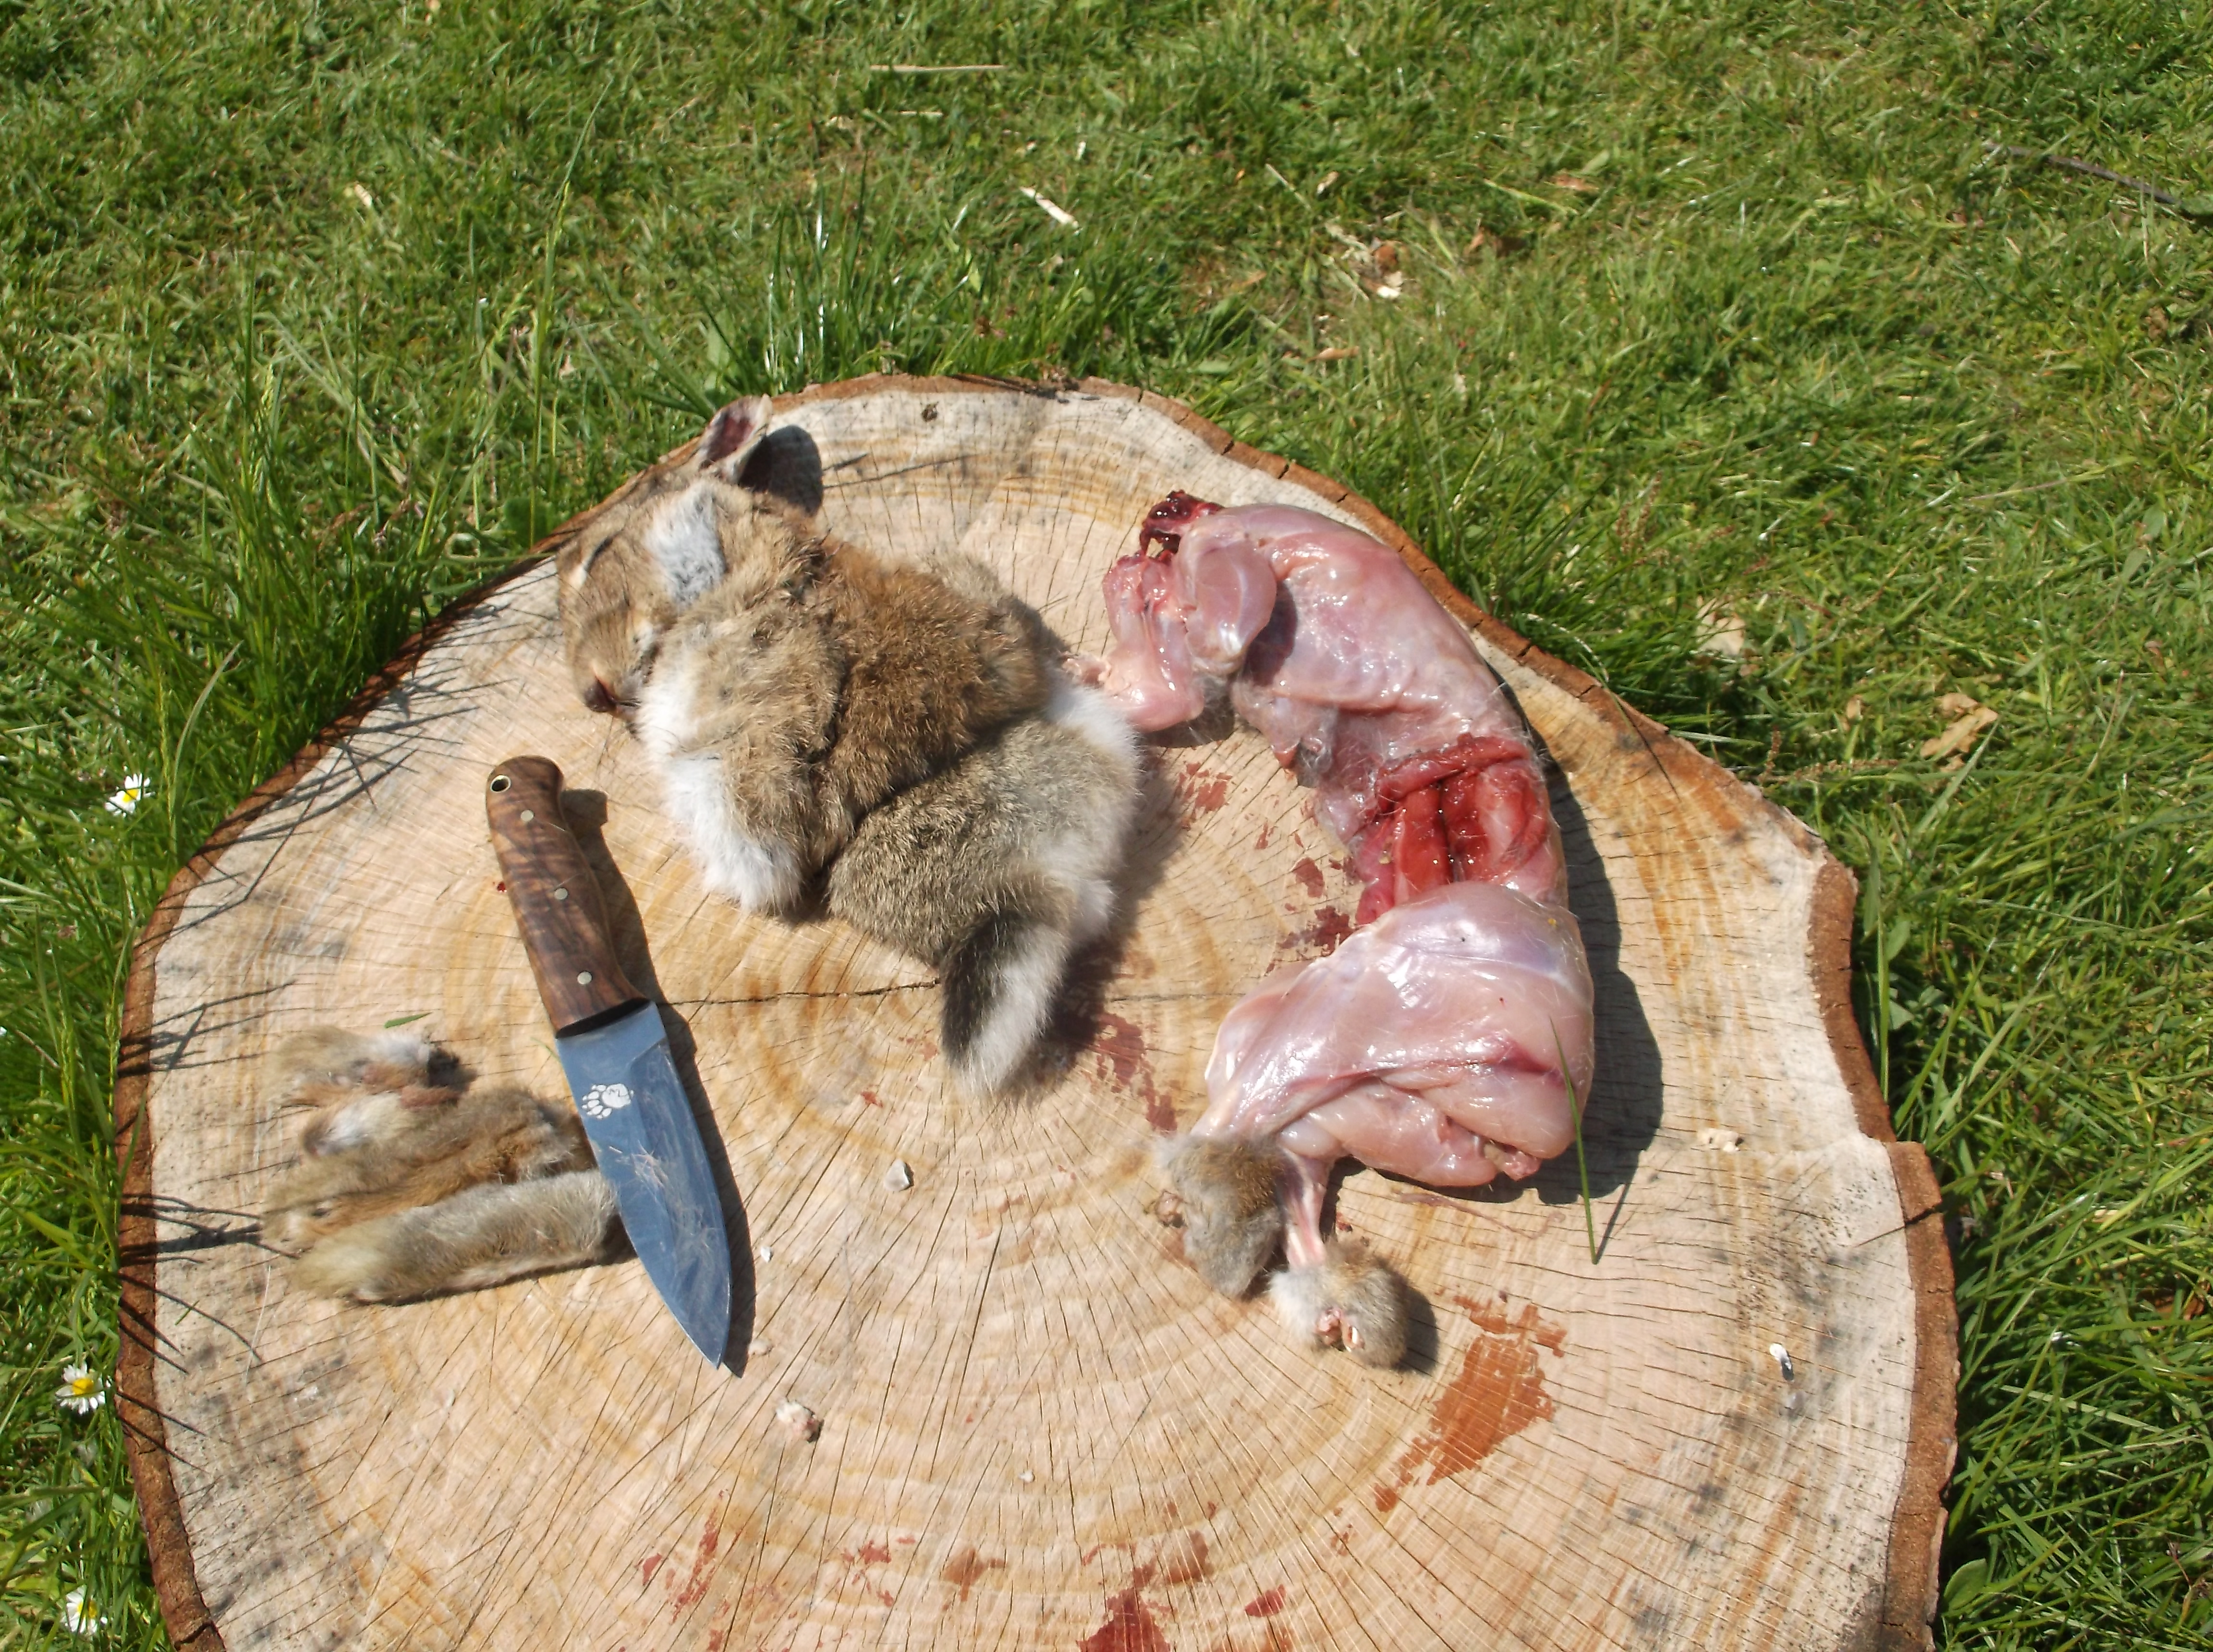 How to skin and butcher a rabbit | Dorset Bushcraft courses ...